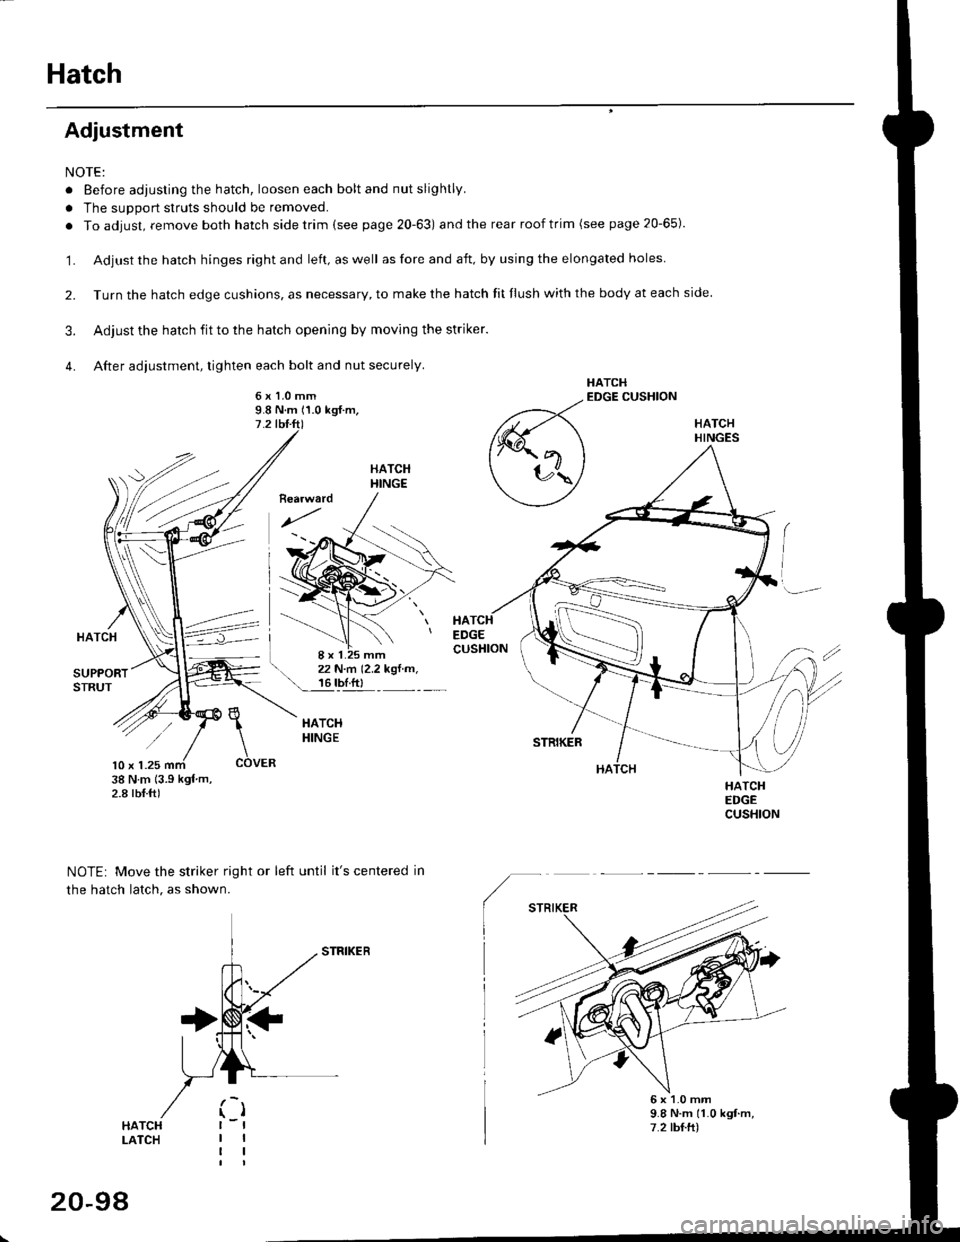 HONDA CIVIC 1999 6.G Workshop Manual Hatch
Adjustment
NOTE:
. Before adjusting the hatch, loosen each bolt and nut slightly.
a The suDport struts should be removed.
. To adjust, remove both hatch sidetrim (see page 20-63) and the rear ro